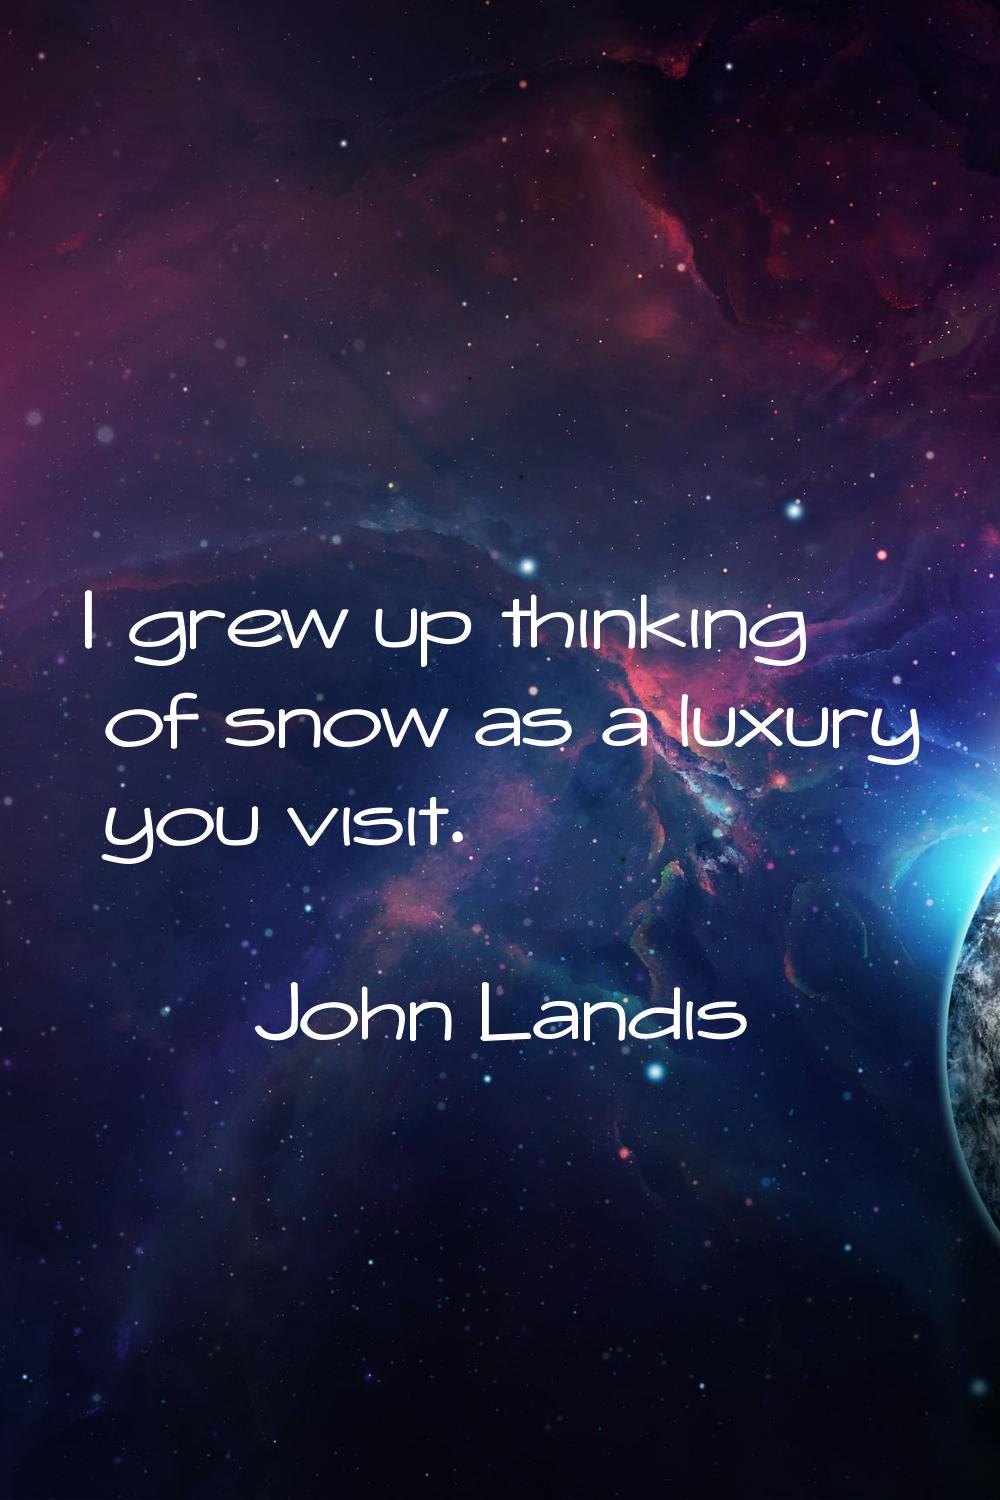 I grew up thinking of snow as a luxury you visit.